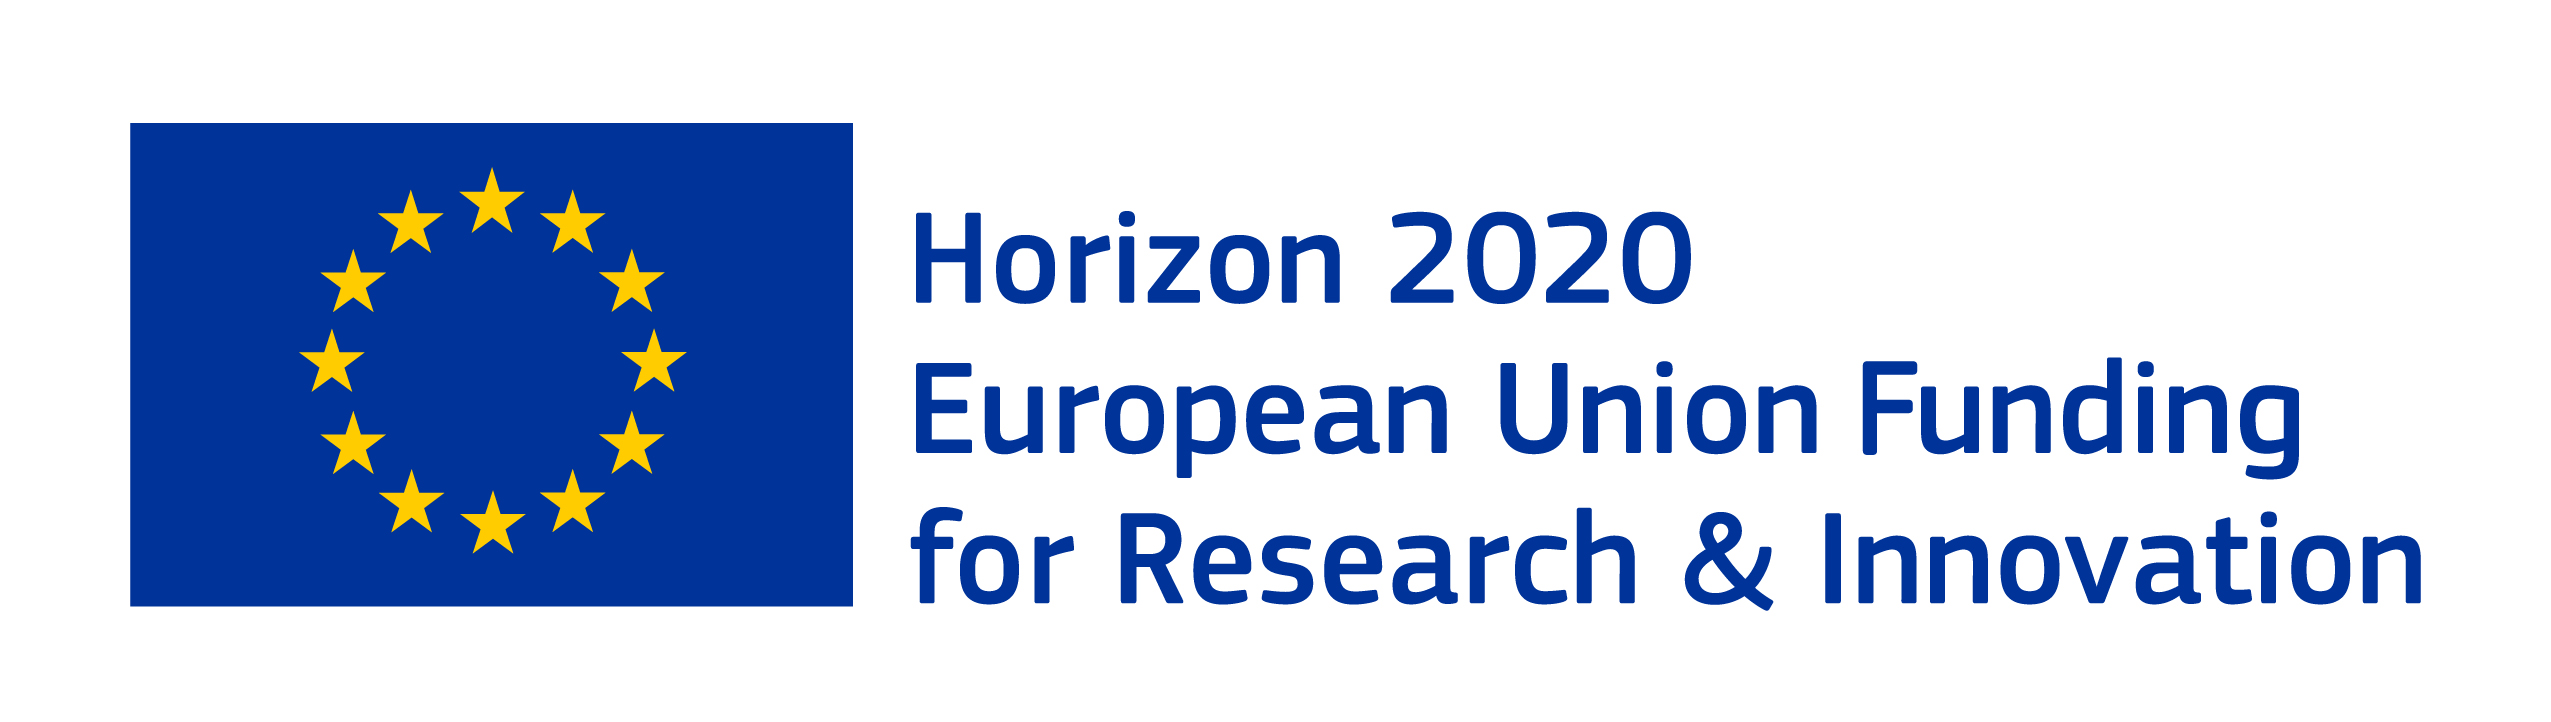 H2020 300ppp